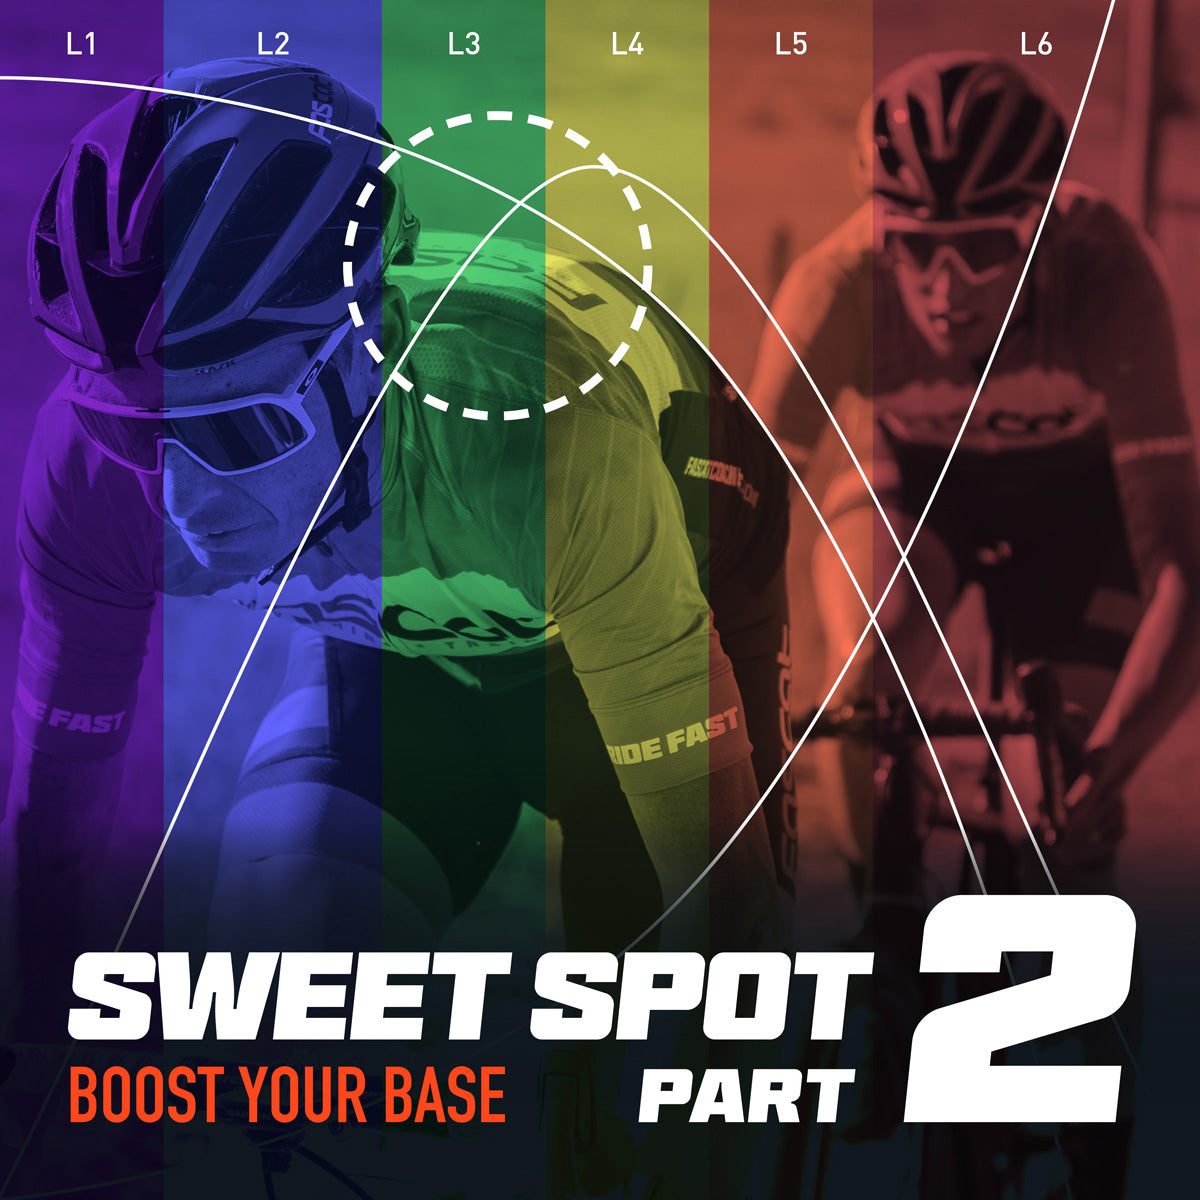 Sweet Spot Part 2: Boost Your Base